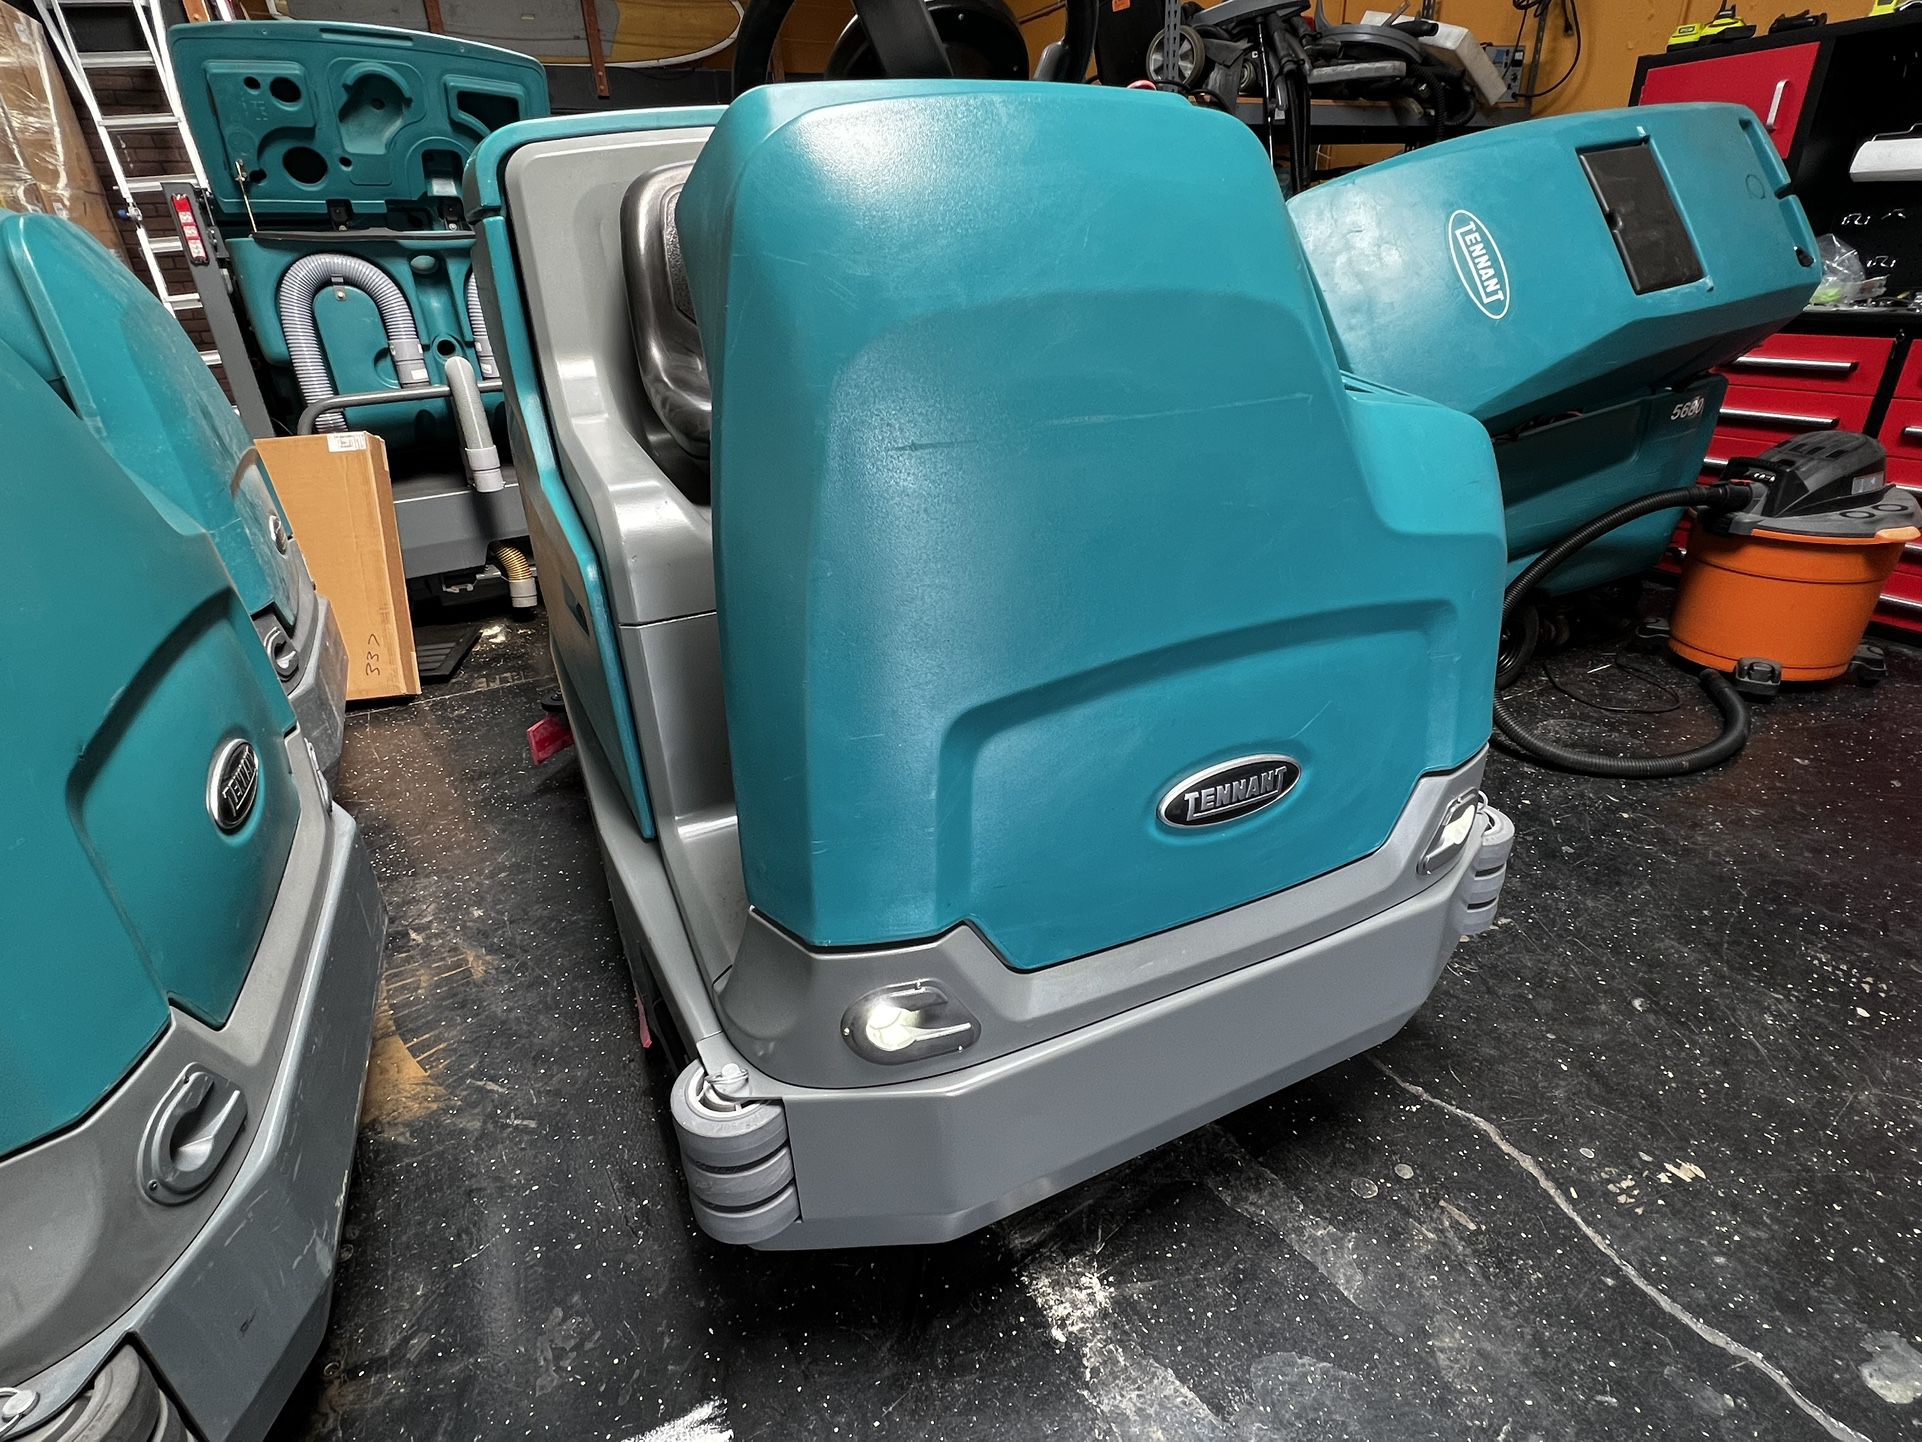 Tennant T17 rider floor scrubber (reconditioned)